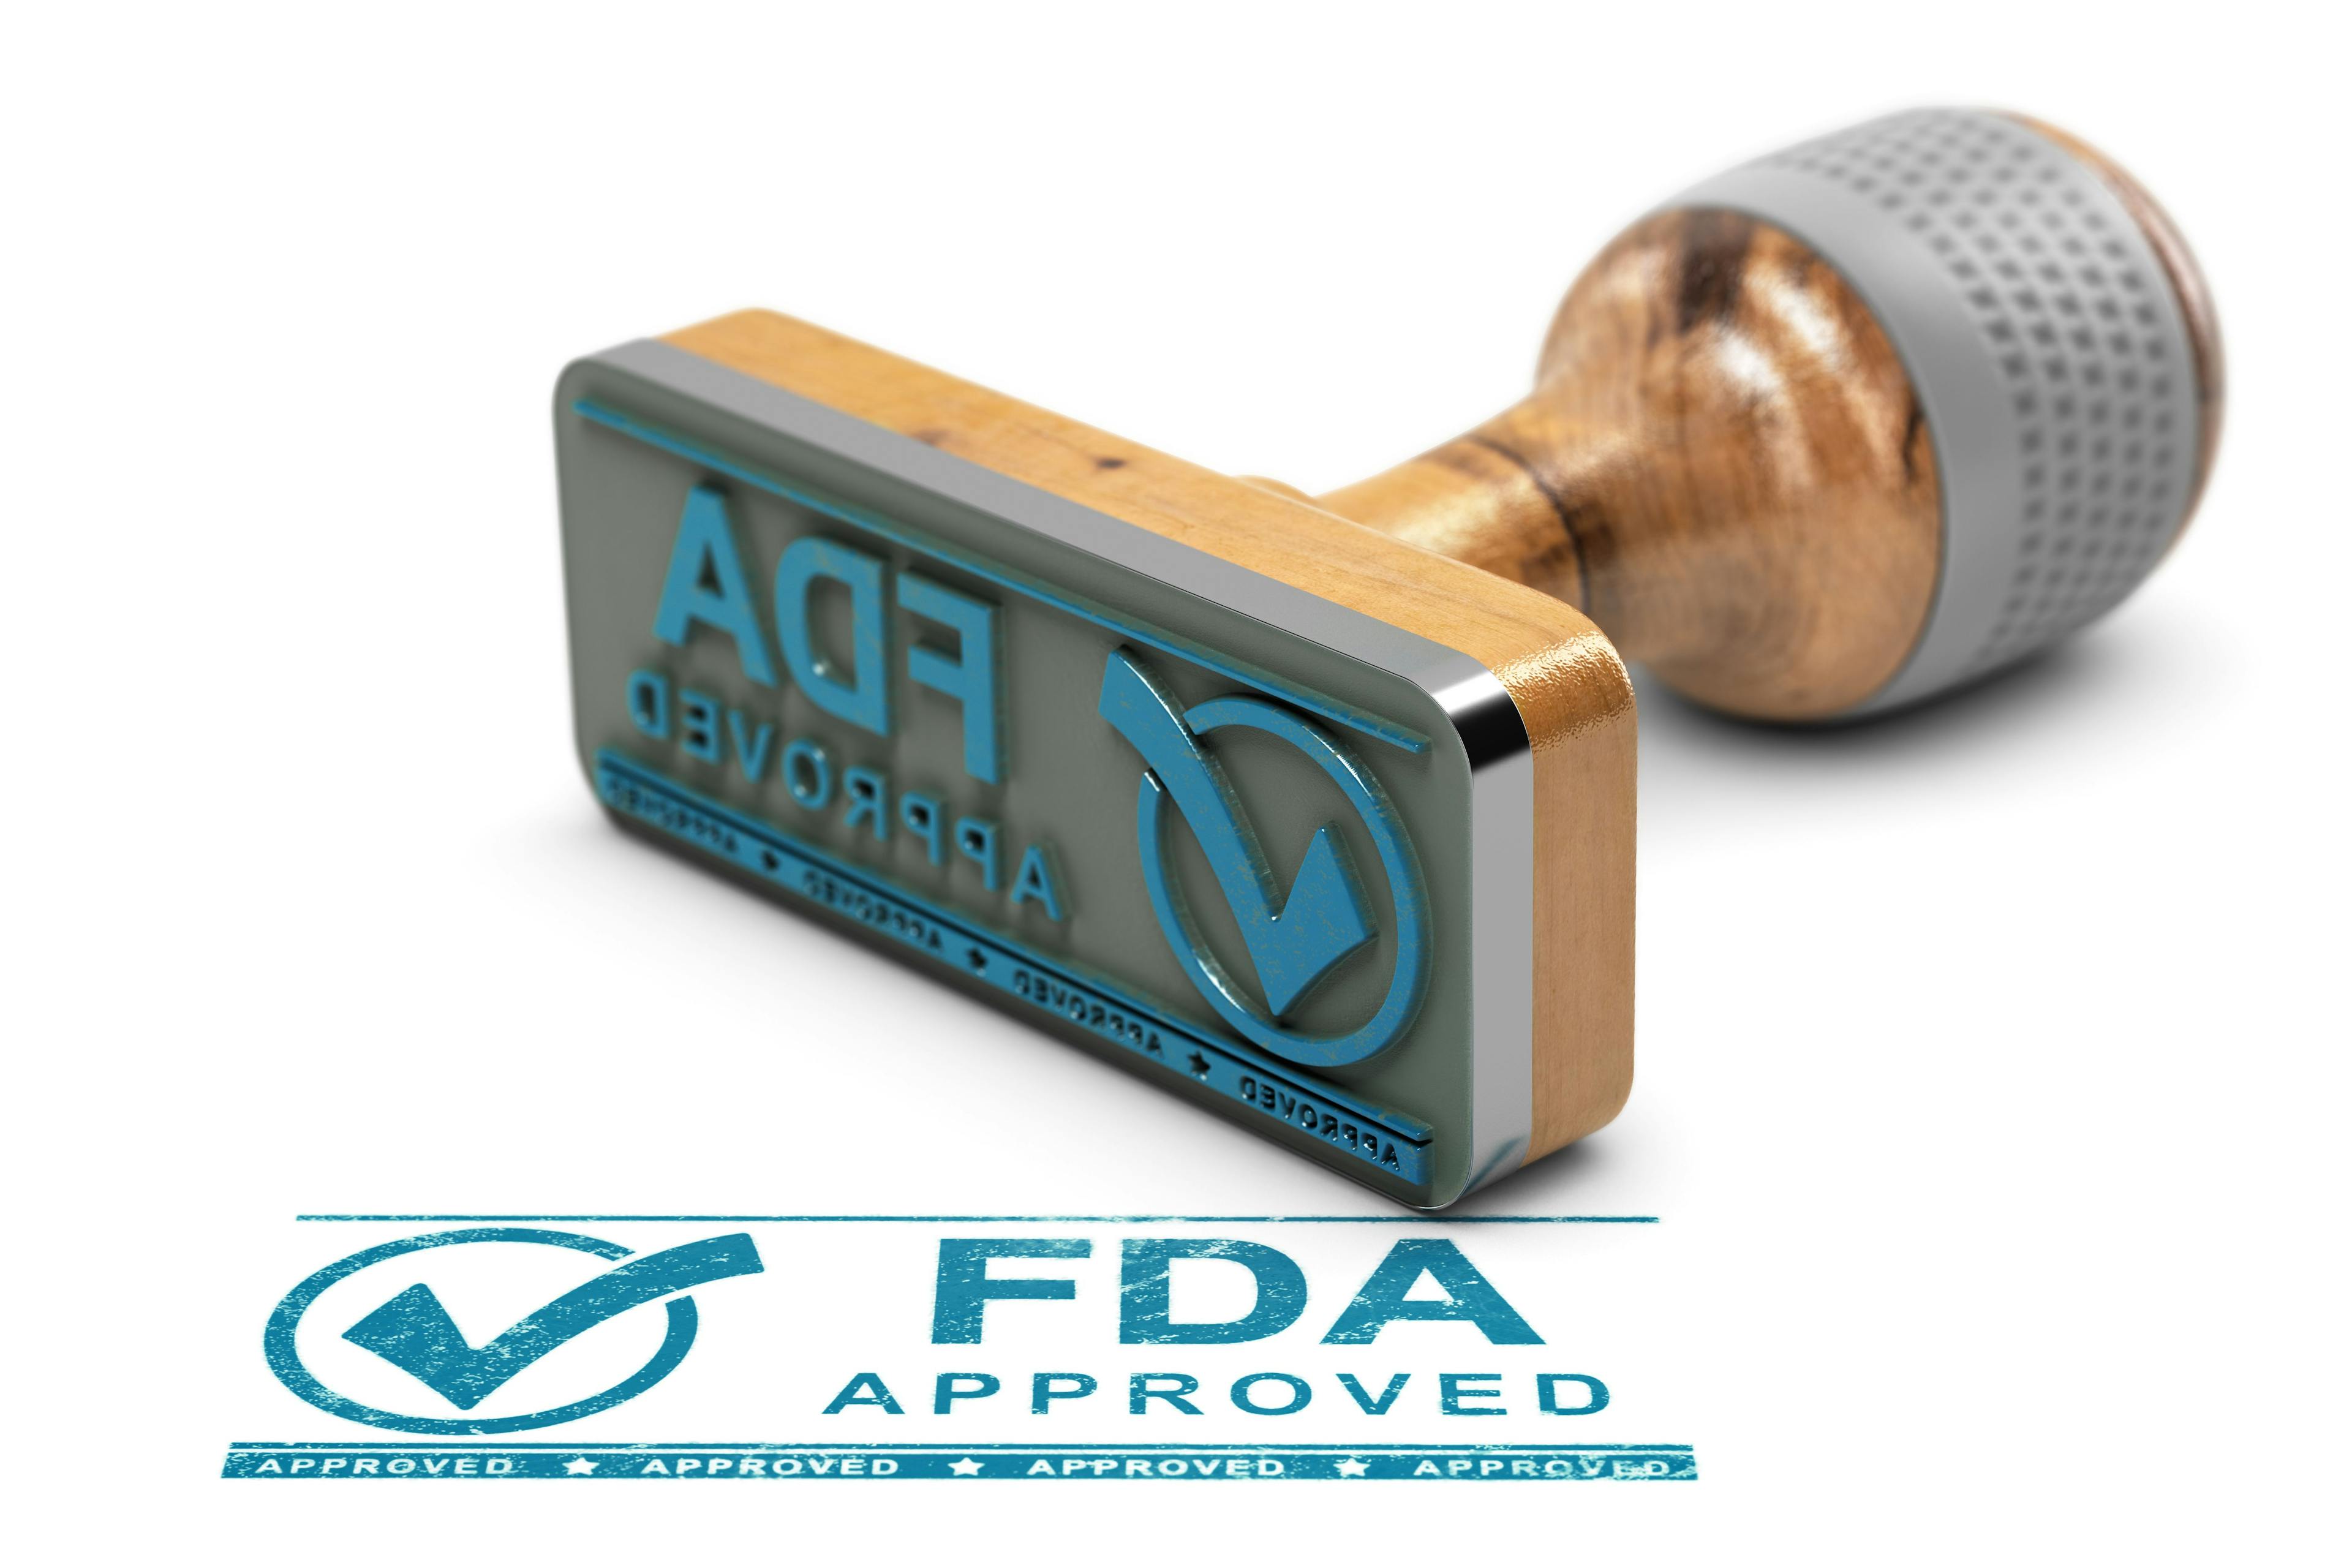 FDA Approves Adzynma for Rare Blood Clotting Disorder cTTP